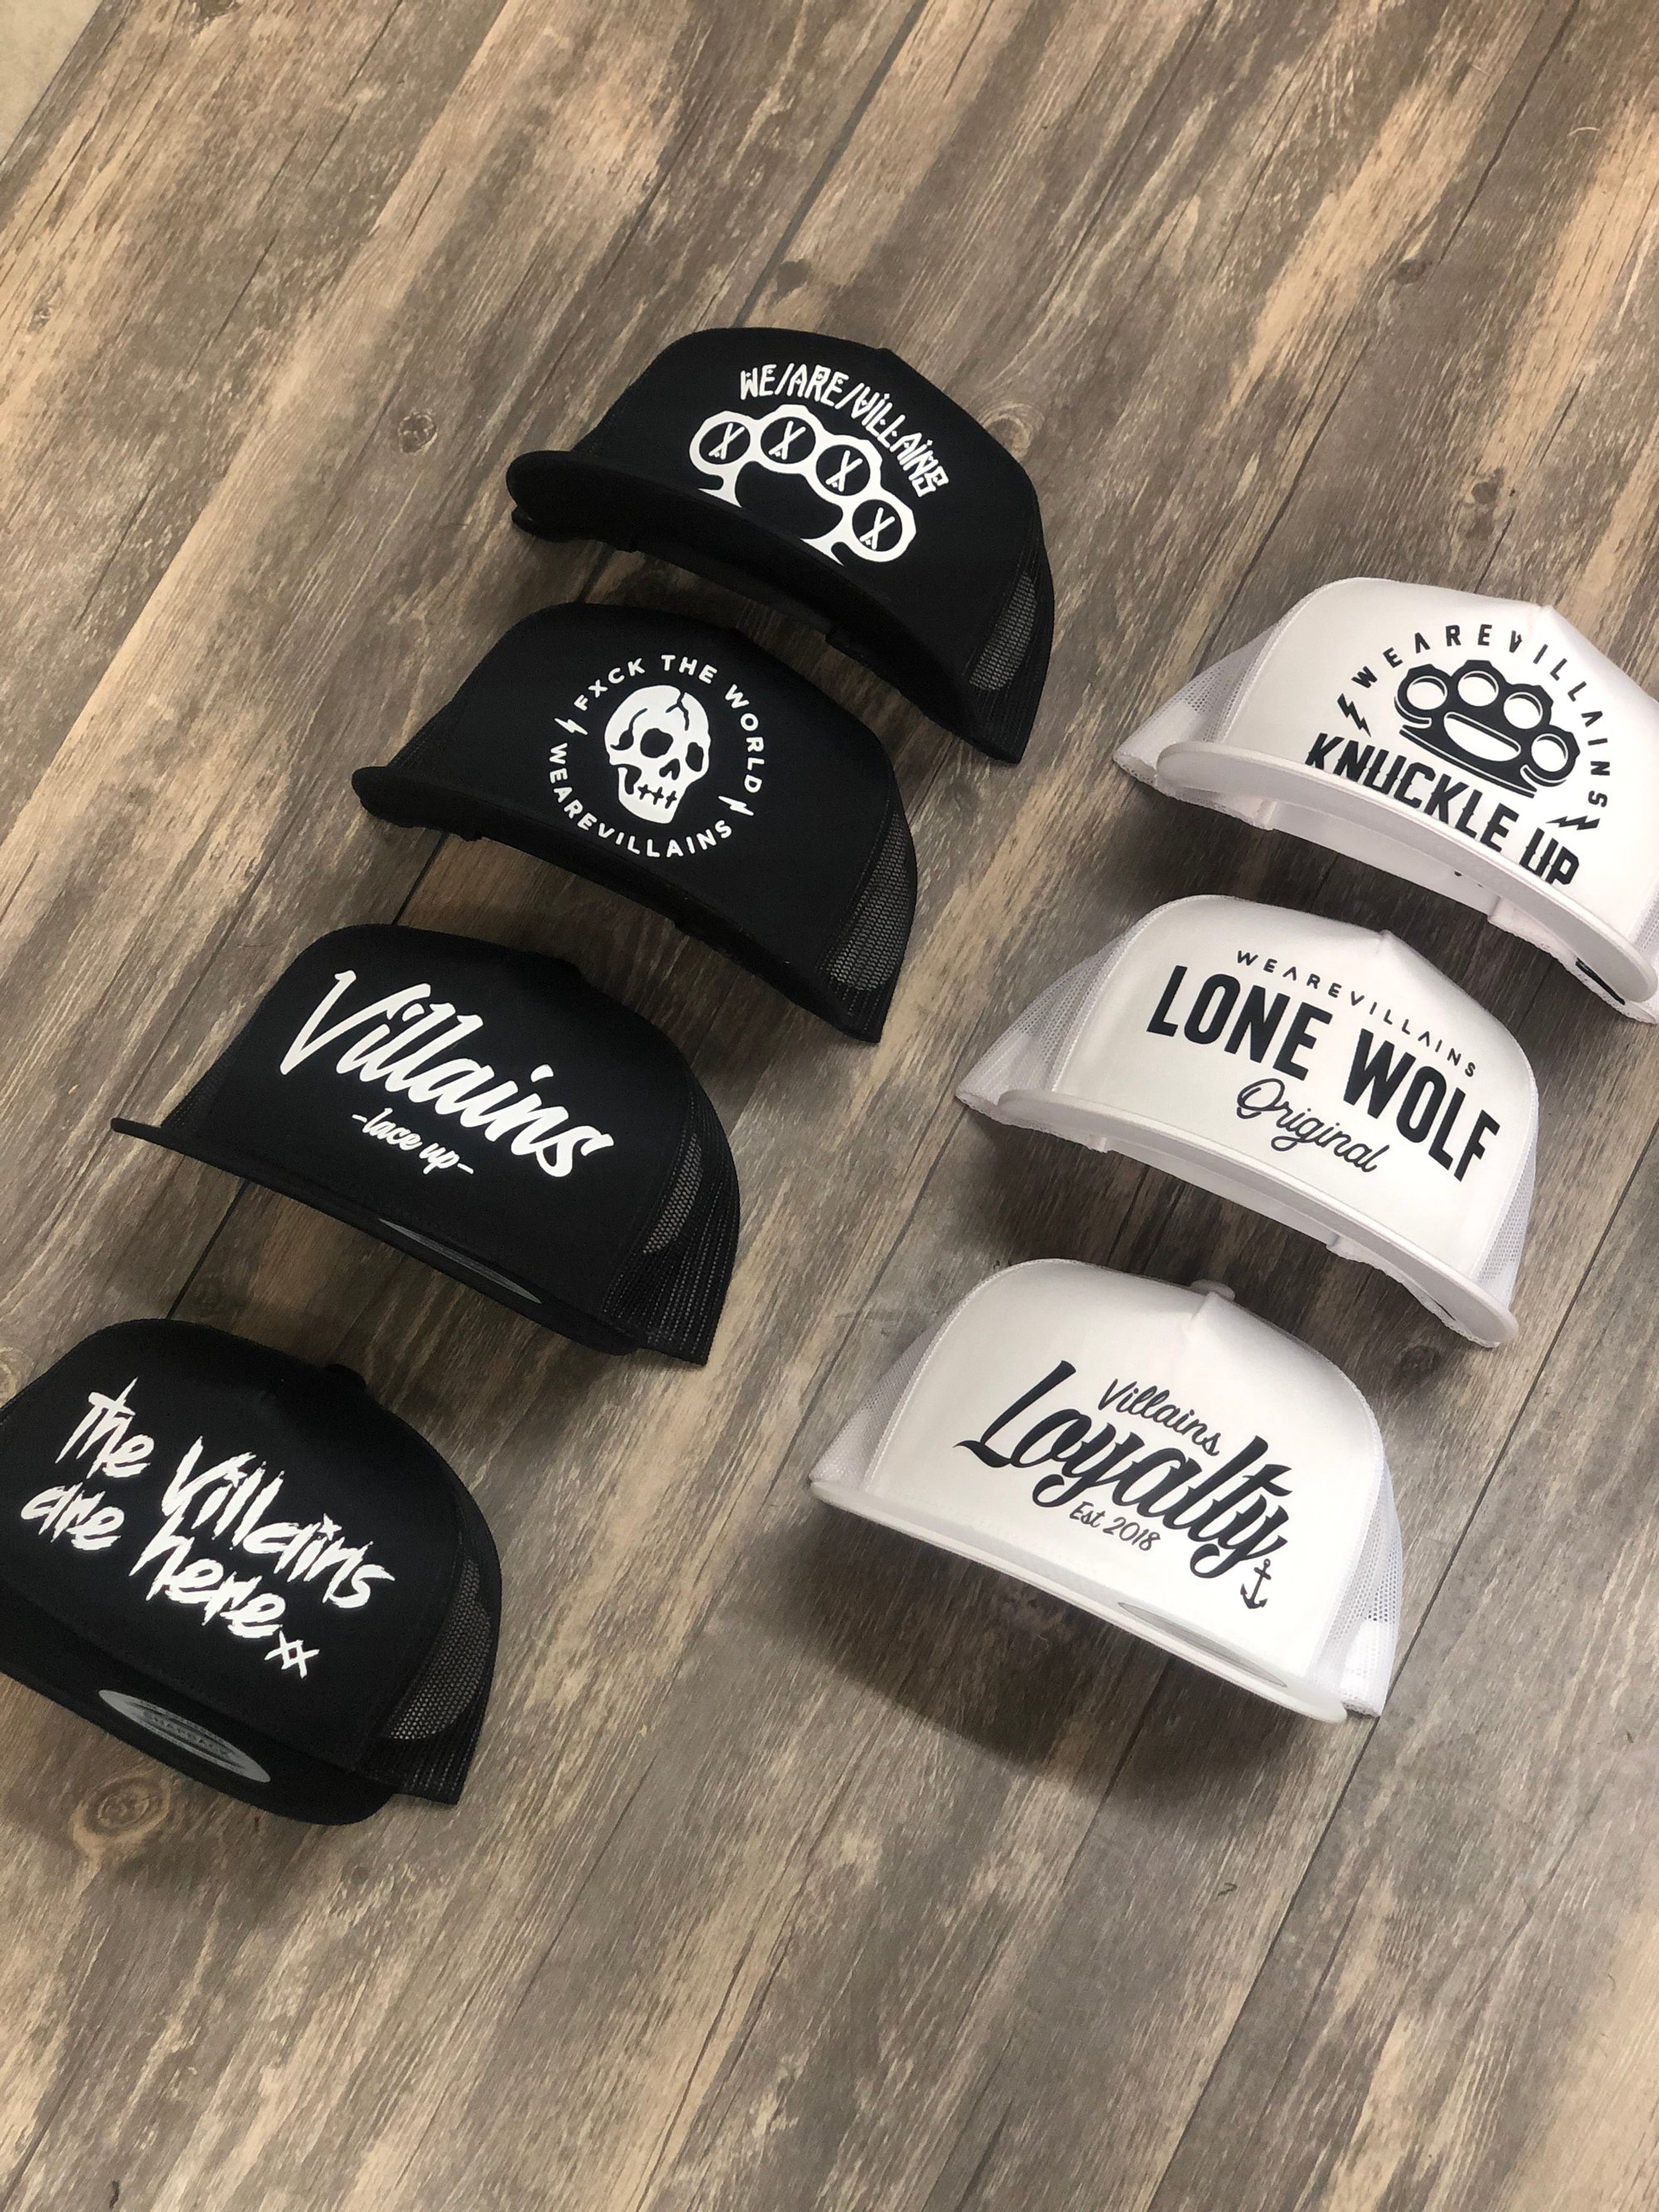 *NEW* SnapBacks and colorways | WEAREVILLAINS